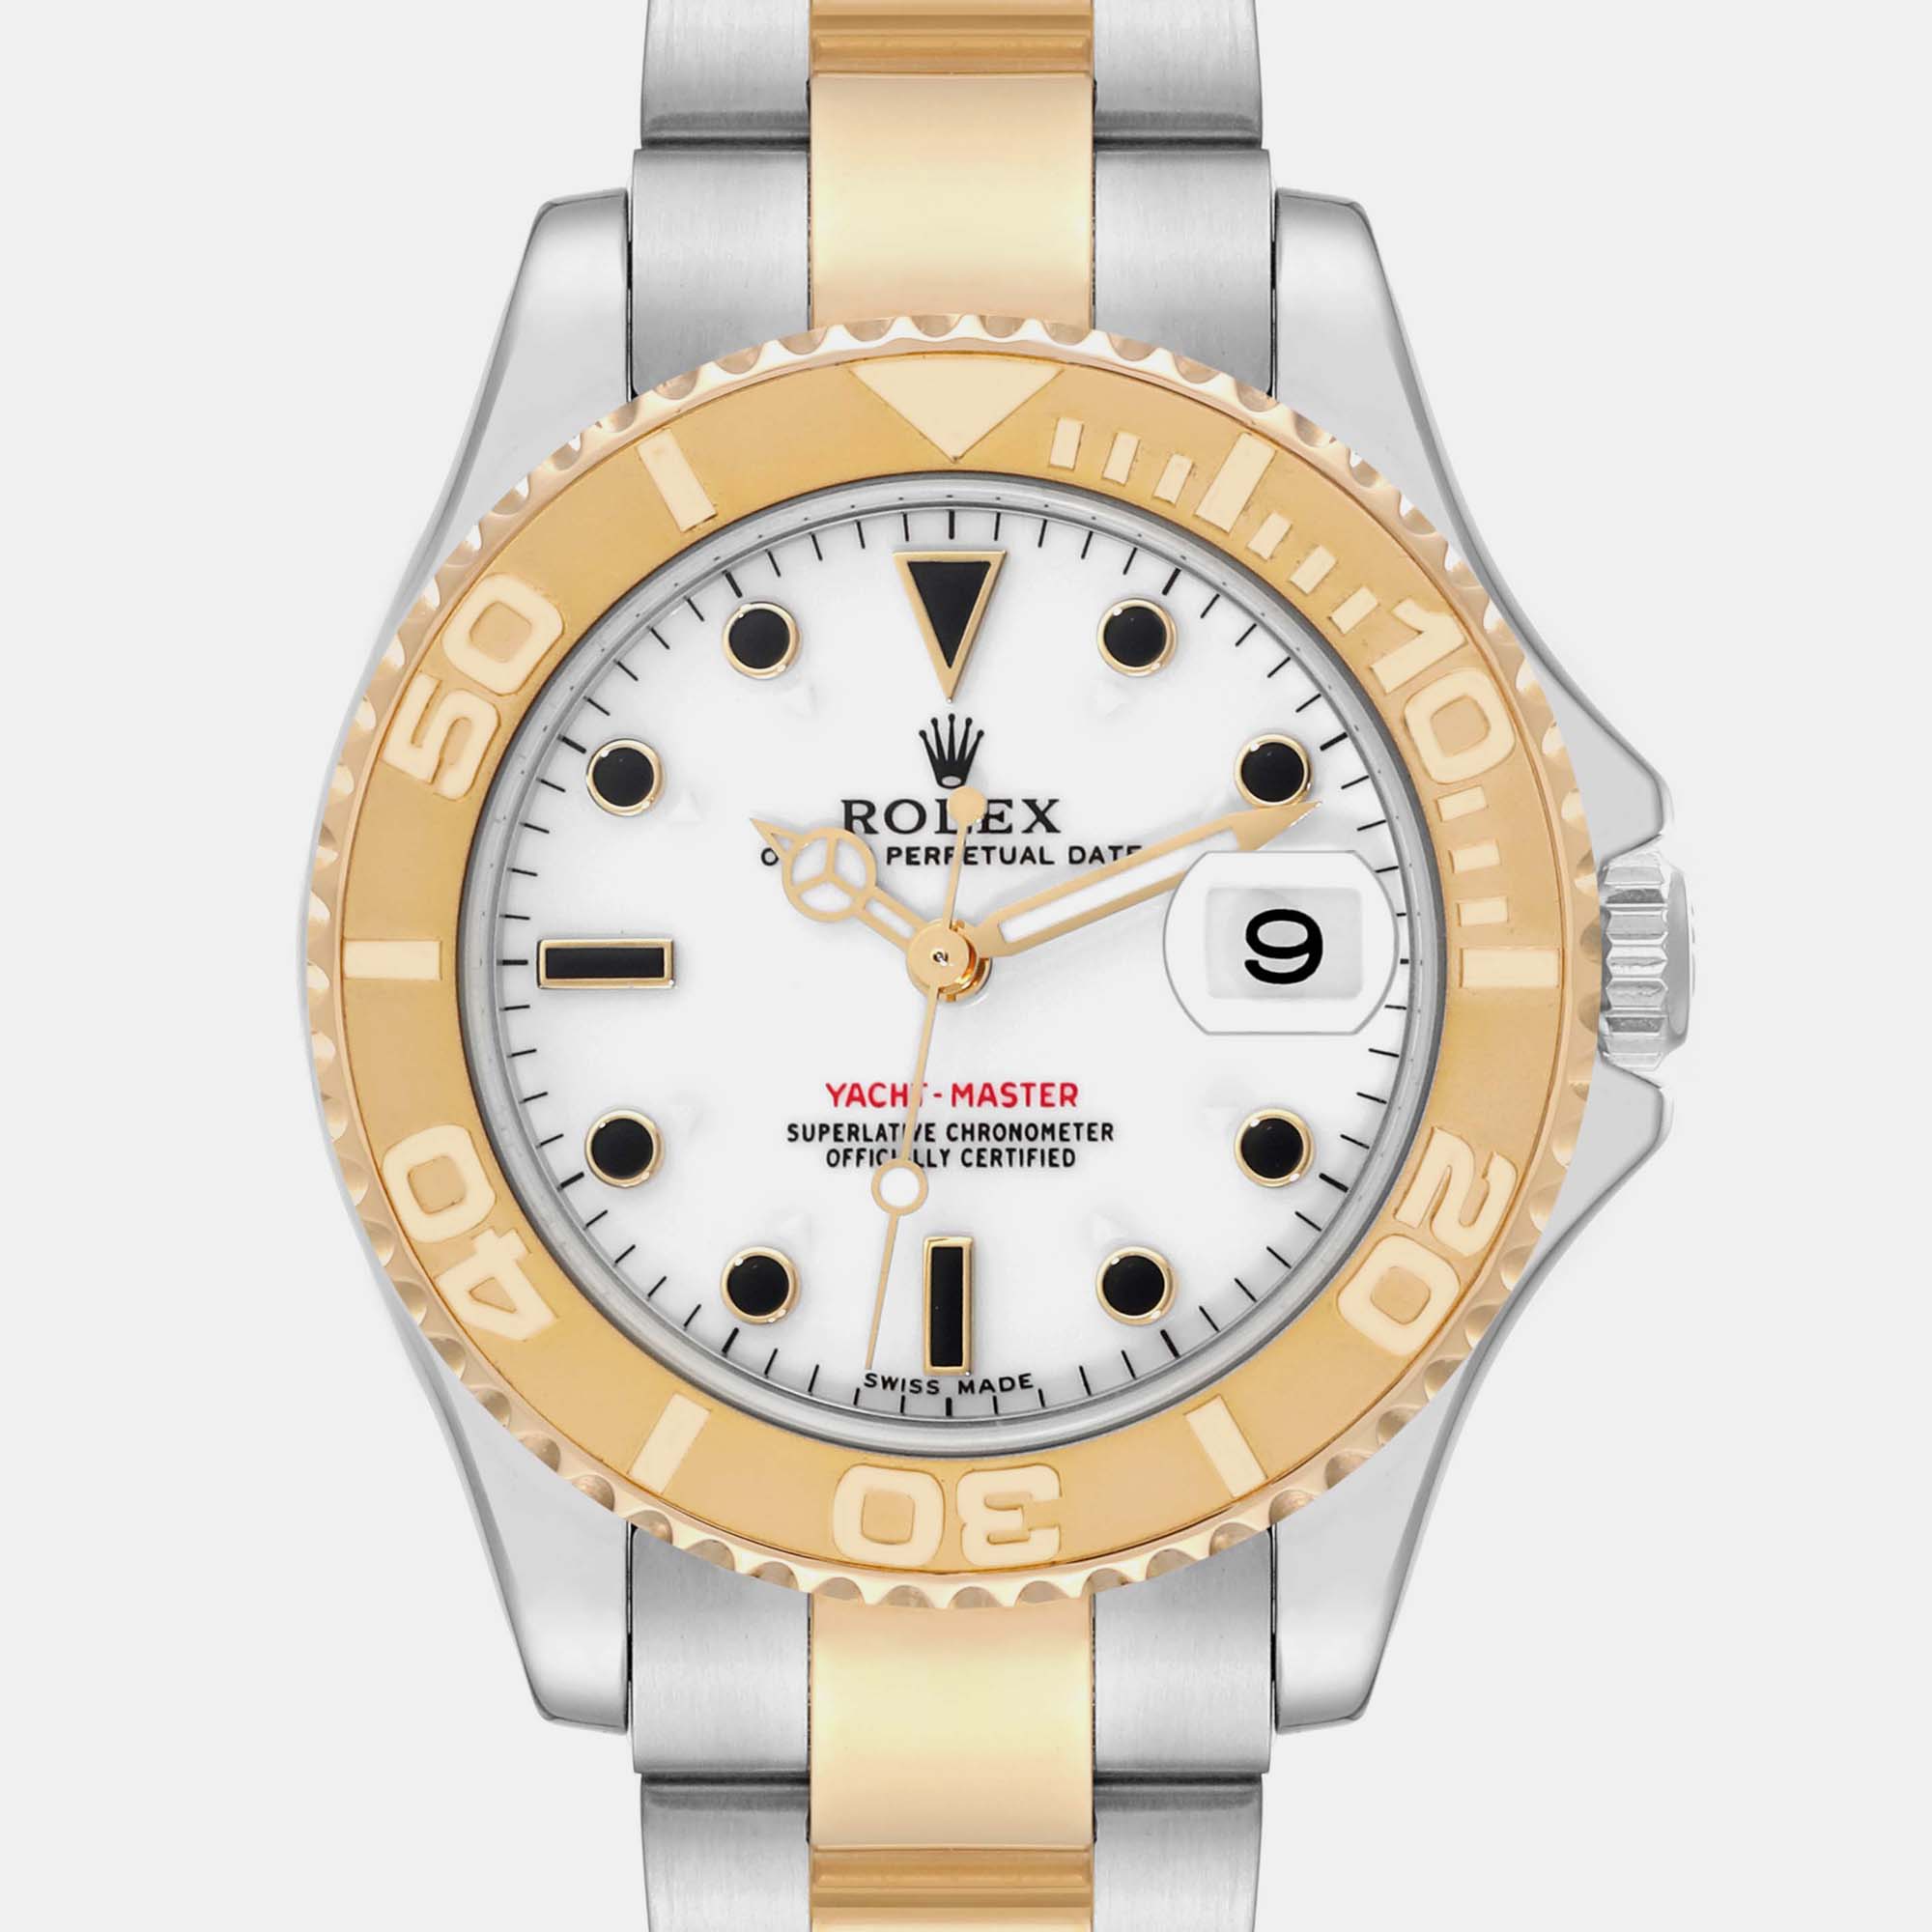 Rolex Yachtmaster Midsize Steel Yellow Gold Mens Watch 168623 35 Mm